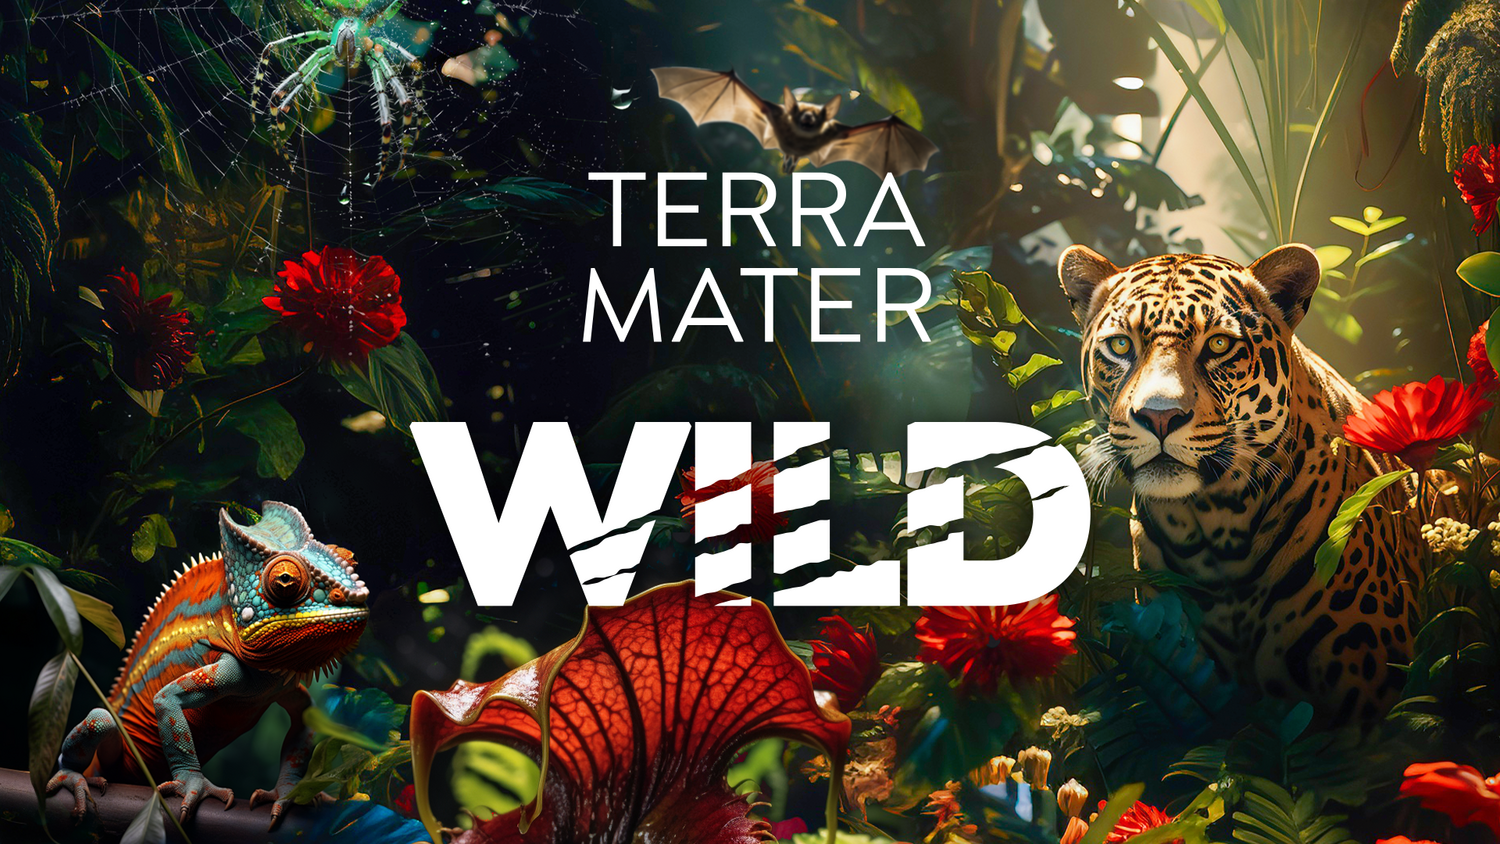 AUTENTIC AND TERRA MATER STUDIOS ANNOUNCE NEW FAST CHANNEL TERRA MATER WILD AT MIPCOM